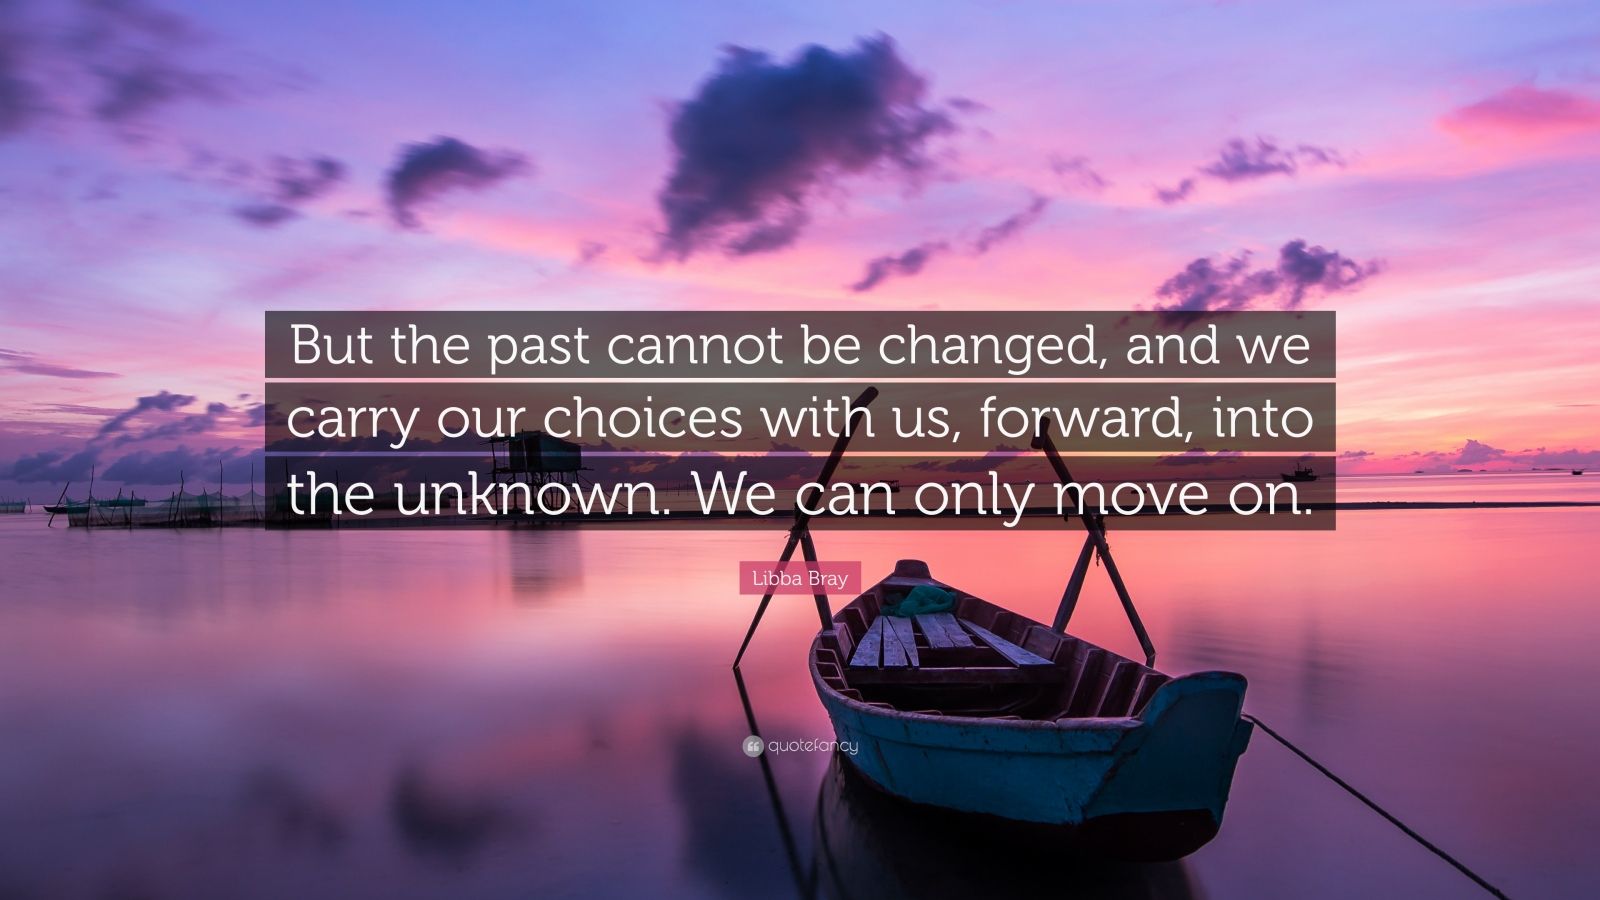 Libba Bray Quote: “But the past cannot be changed, and we carry our ...